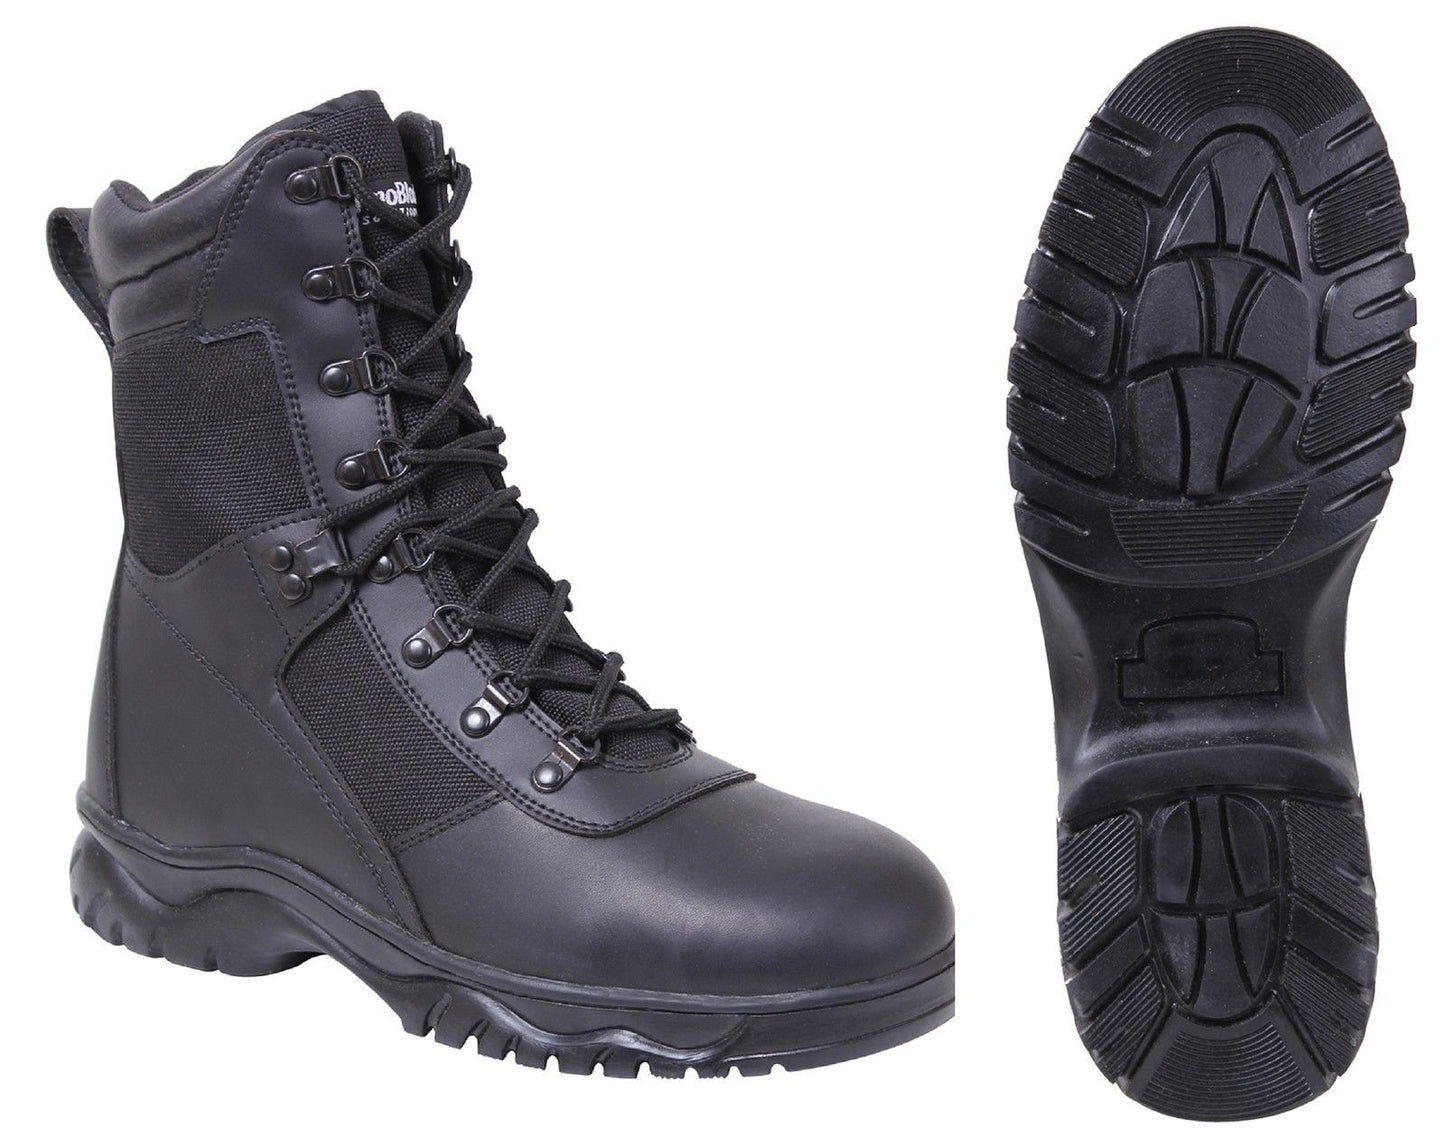 Men's Black 8" Side-Zipper Extreme Weather Insulated Tactical Boots Sizes 5 - 15